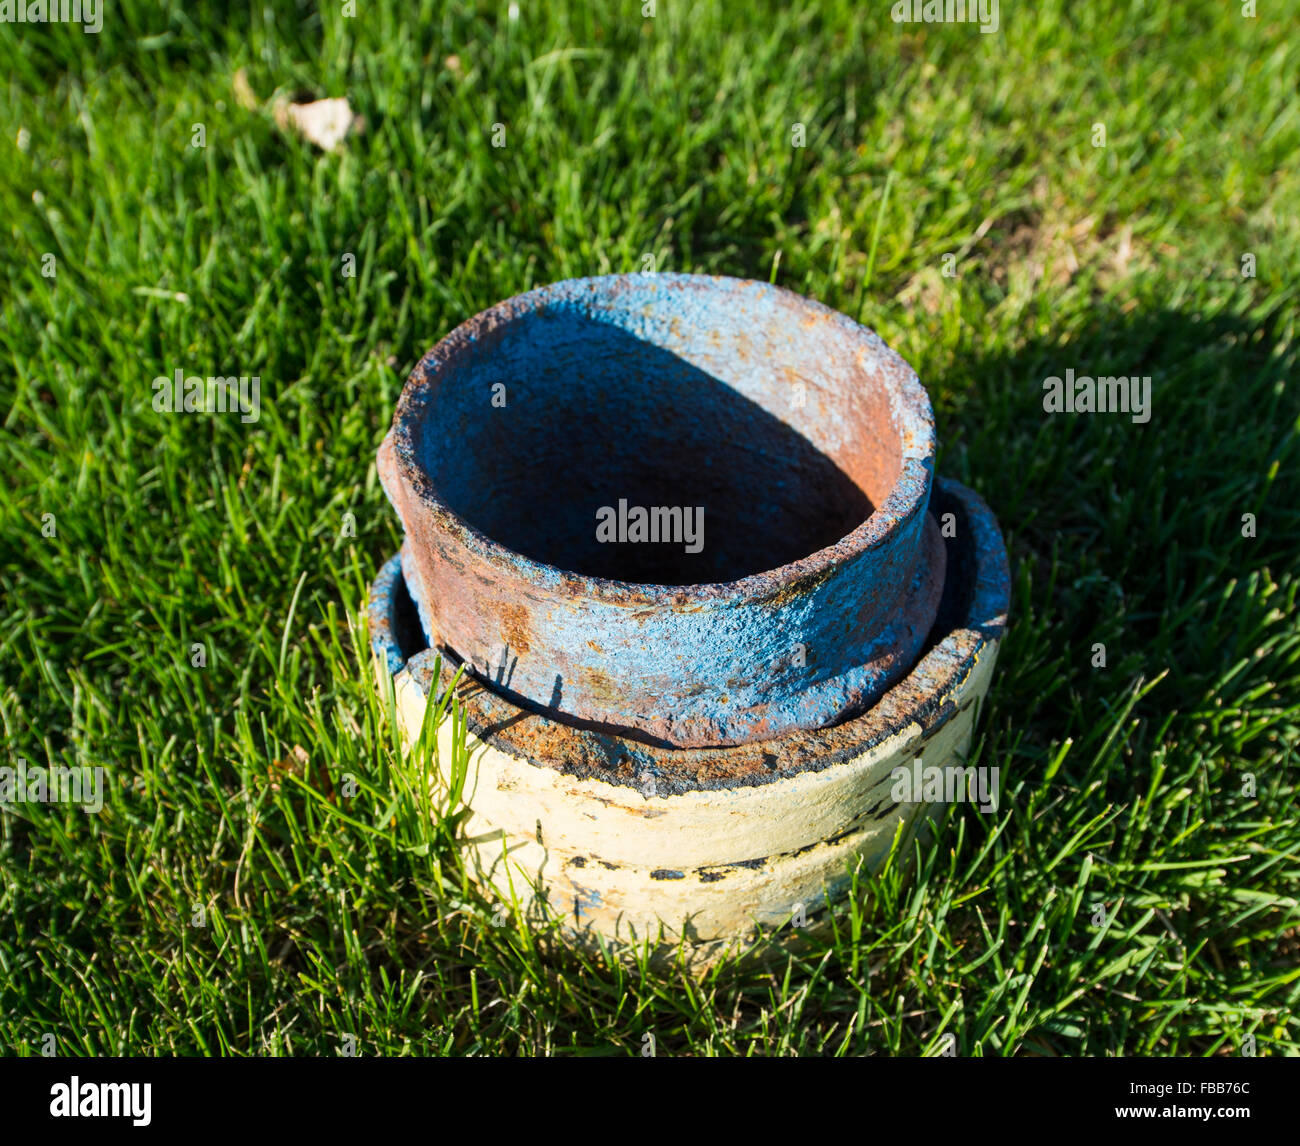 A utility or ventilation pipe of unknown purpose rusting and painted blue, water outlet of some sort perhaps. Stock Photo